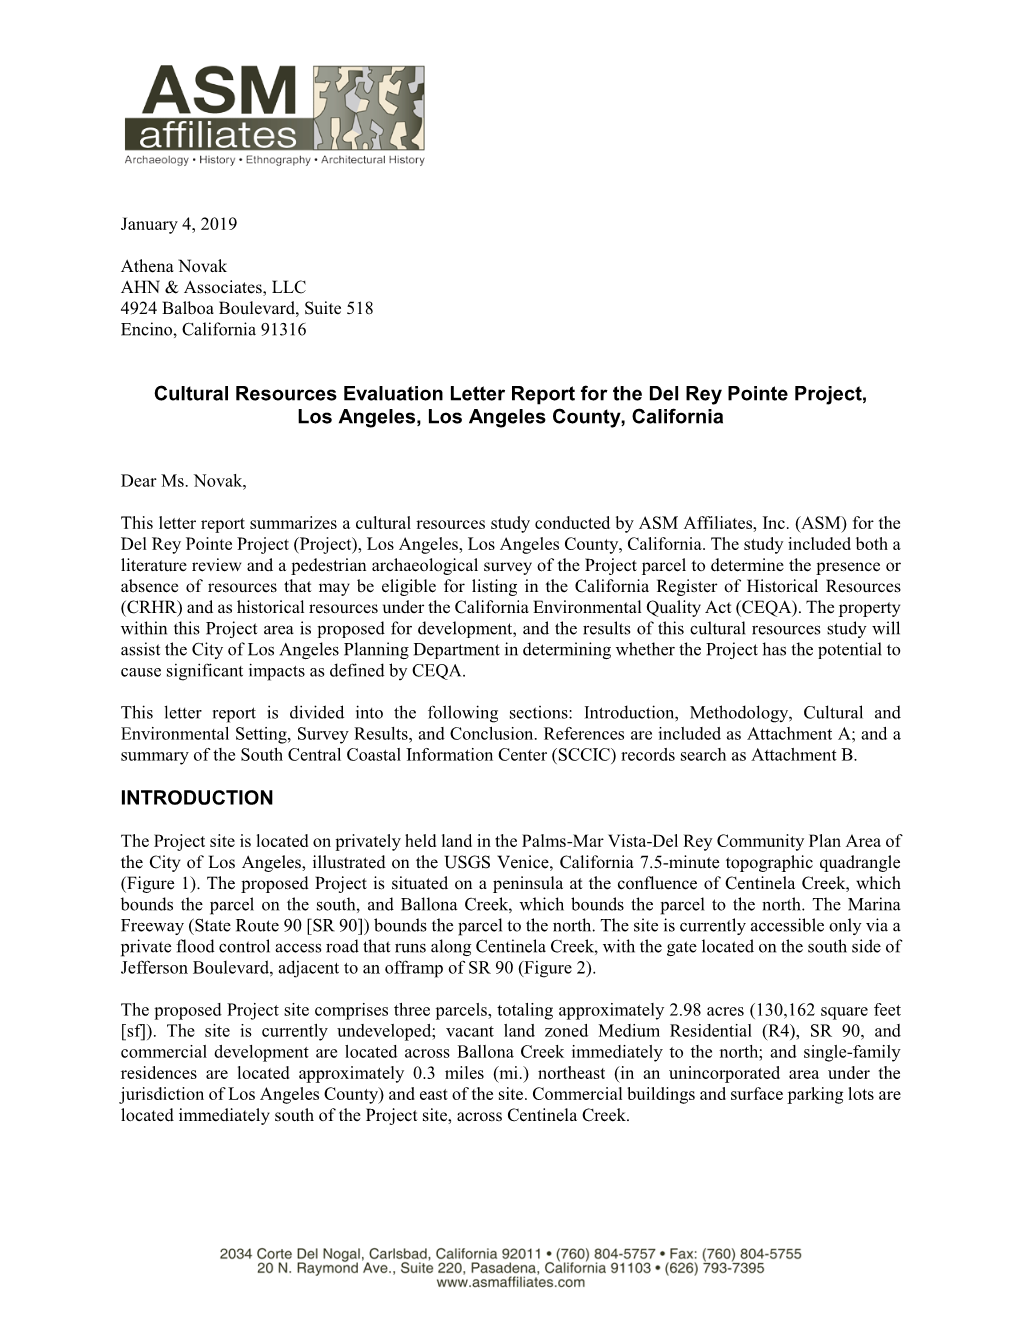 Cultural Resources Evaluation Letter Report for the Del Rey Pointe Project, Los Angeles, Los Angeles County, California INTRODU